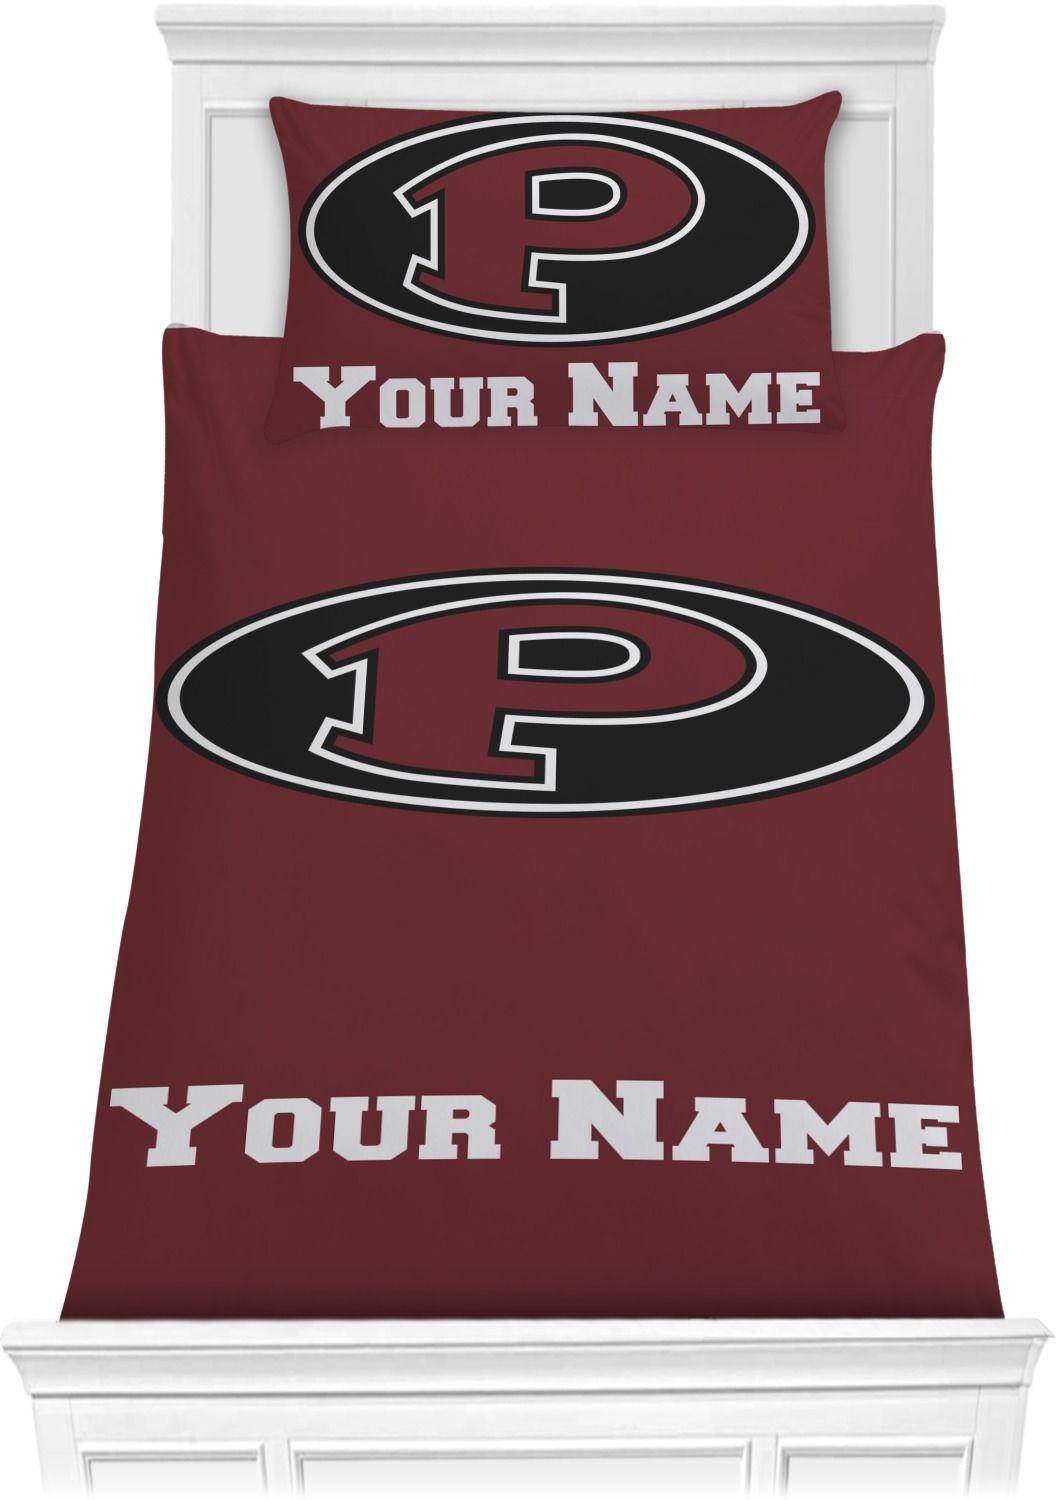 Pearland P Logo - Pearland Oilers 